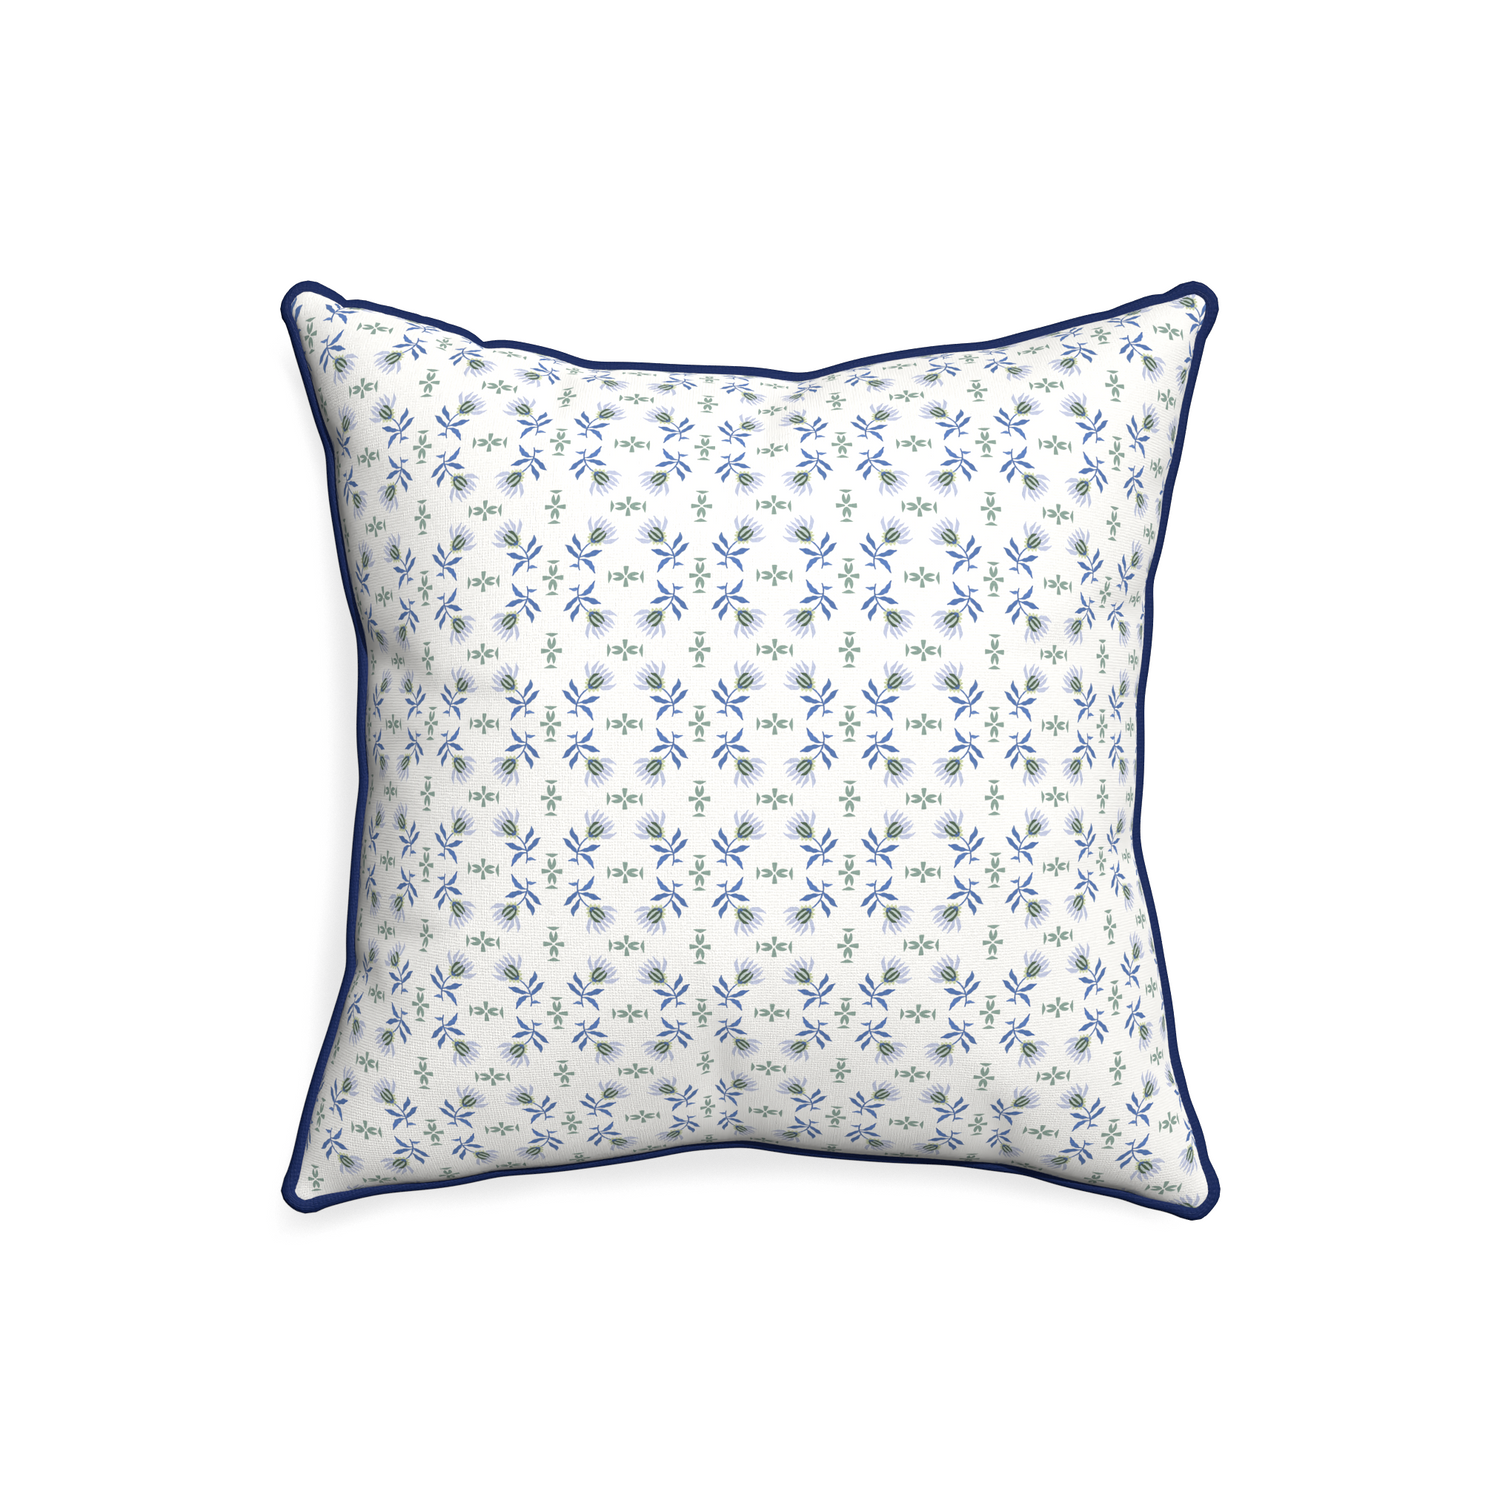 20-square lee custom blue & green floralpillow with midnight piping on white background